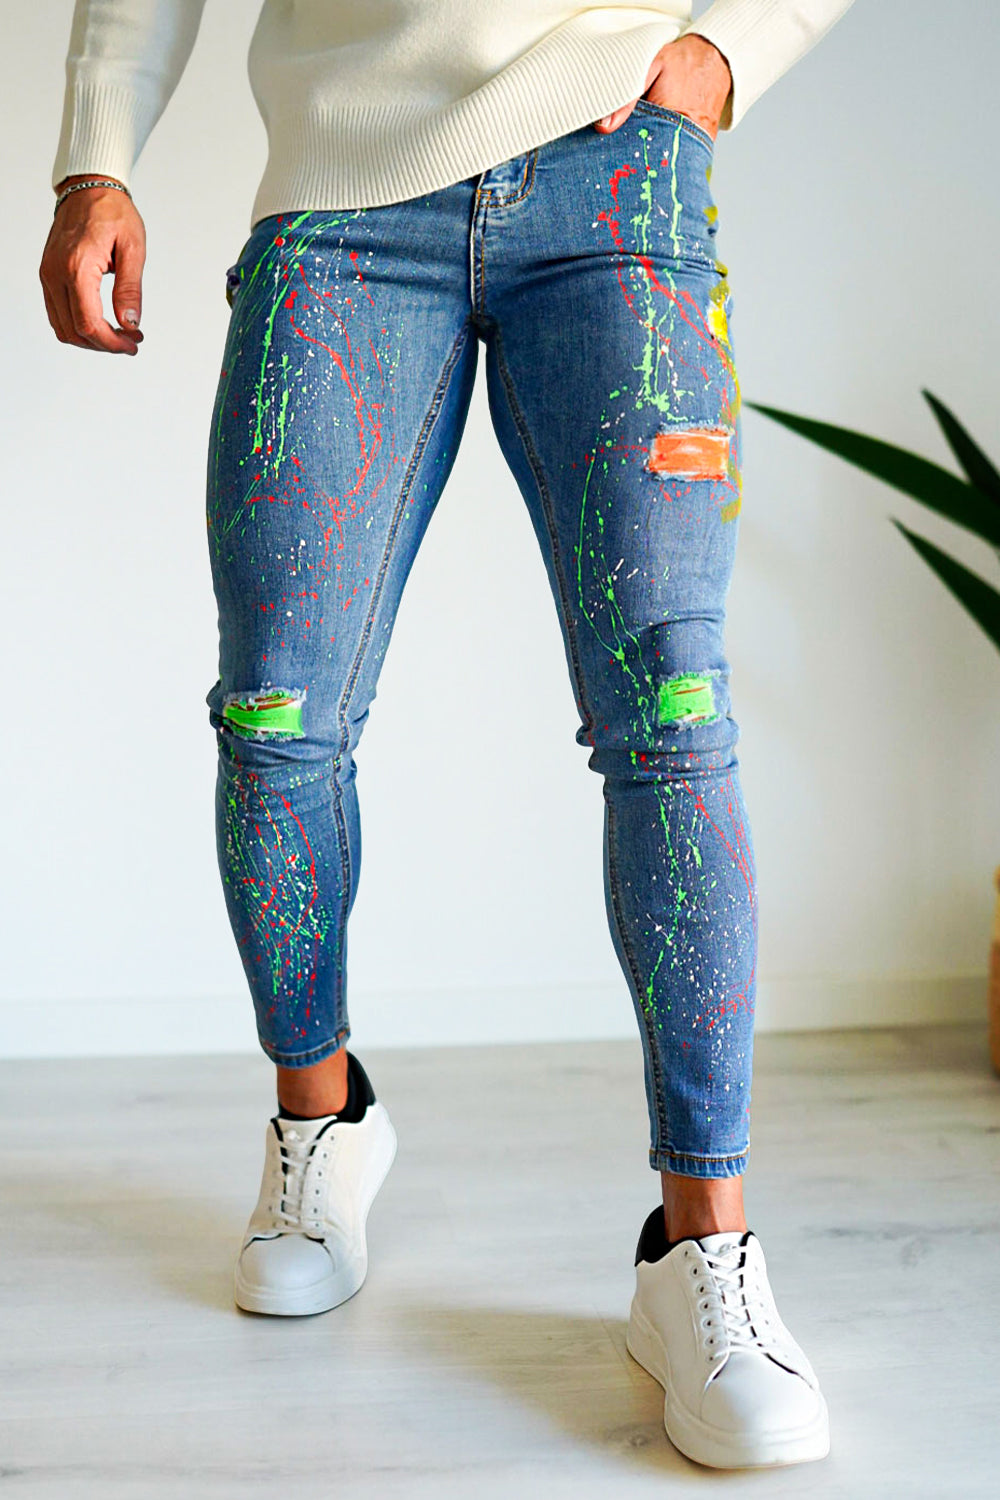 Gingtto New Cool Hip Hop Street Denim Ripped Skinny Mens Jeans